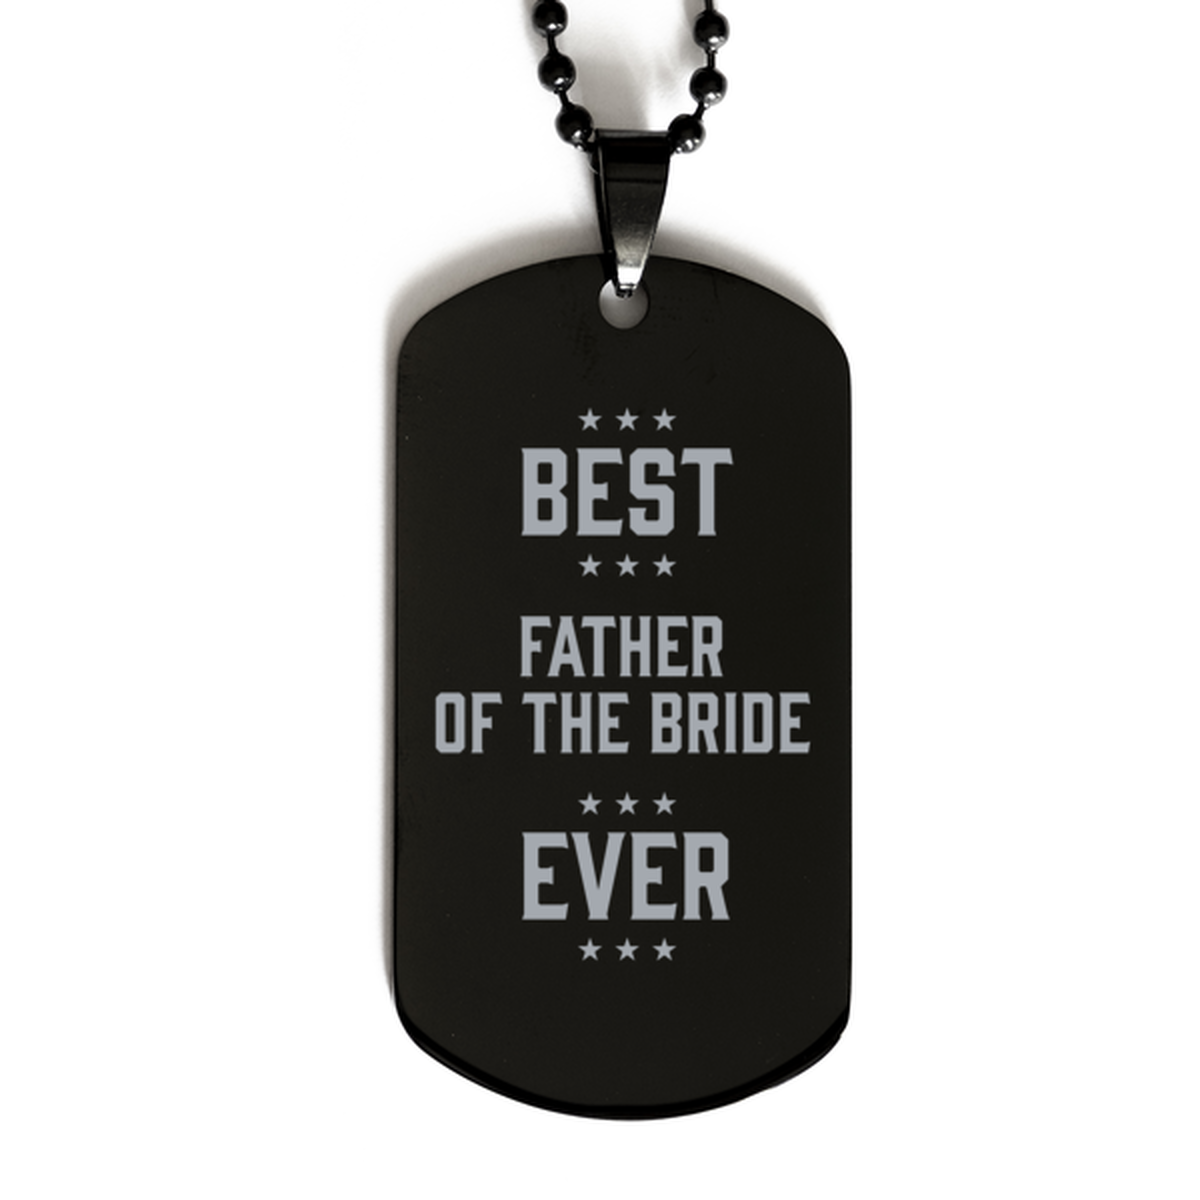 Best Father of the bride Ever Father of the bride Gifts, Funny Black Dog Tag For Father of the bride, Birthday Family Presents Engraved Necklace For Men